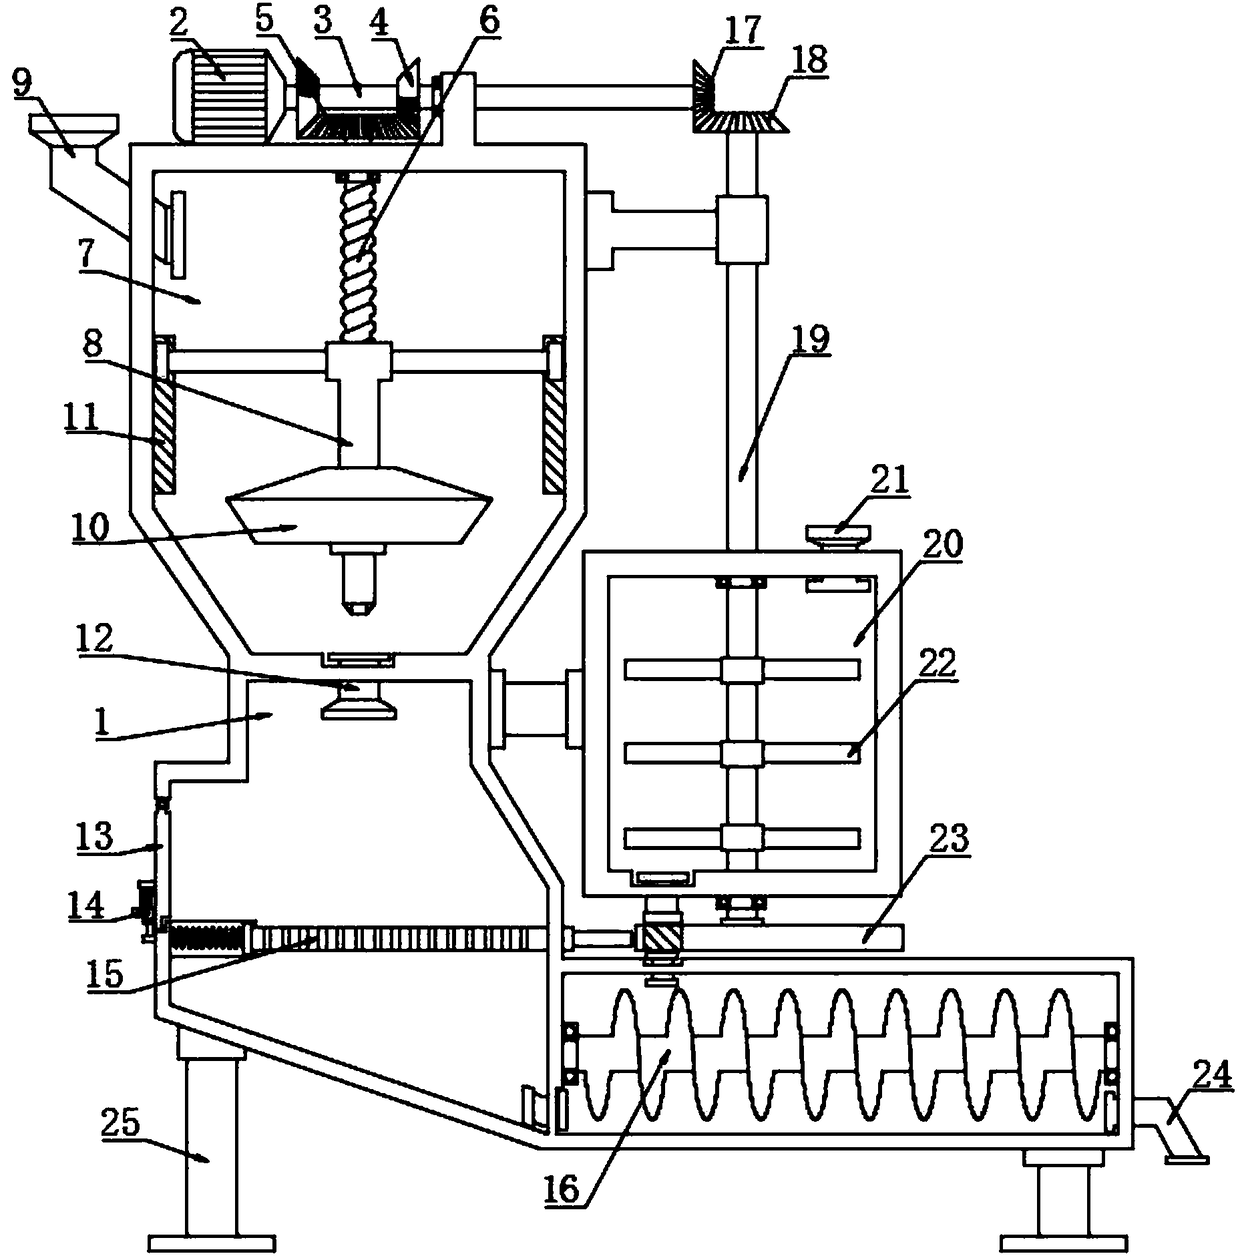 Remediation device for arsenic-contaminated soil